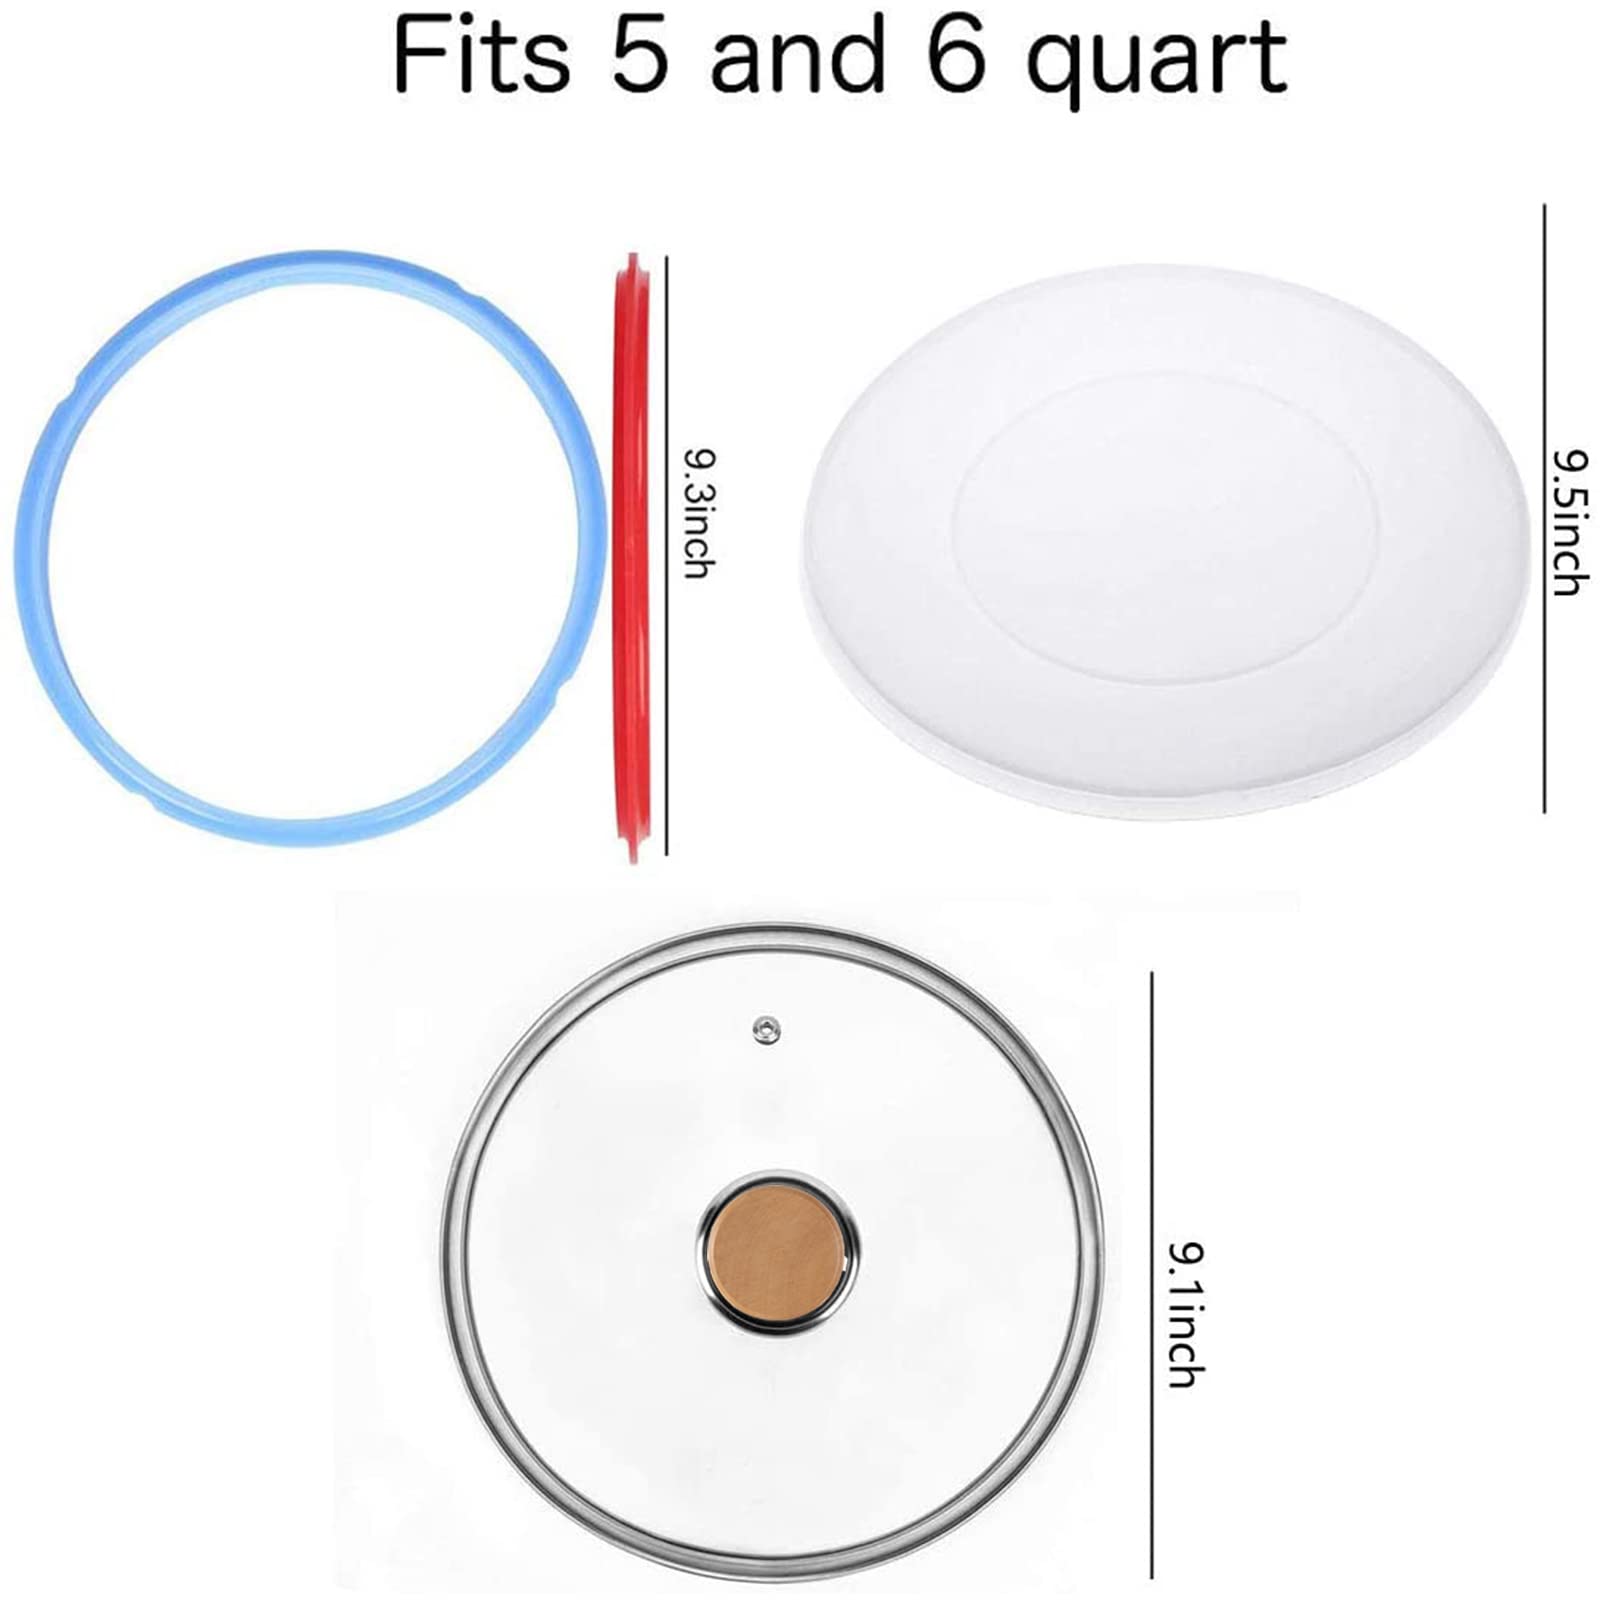 9 inch Tempered Glass Lid for Instant Pot 6 Quart, Silicone Lid Silicone Cover for Instant Pot 6 Quart, Silicone Sealing Rings for Instant Pot 5 qt or 6 qt (2 Pack), Set of 4 Instant Pot Accessories